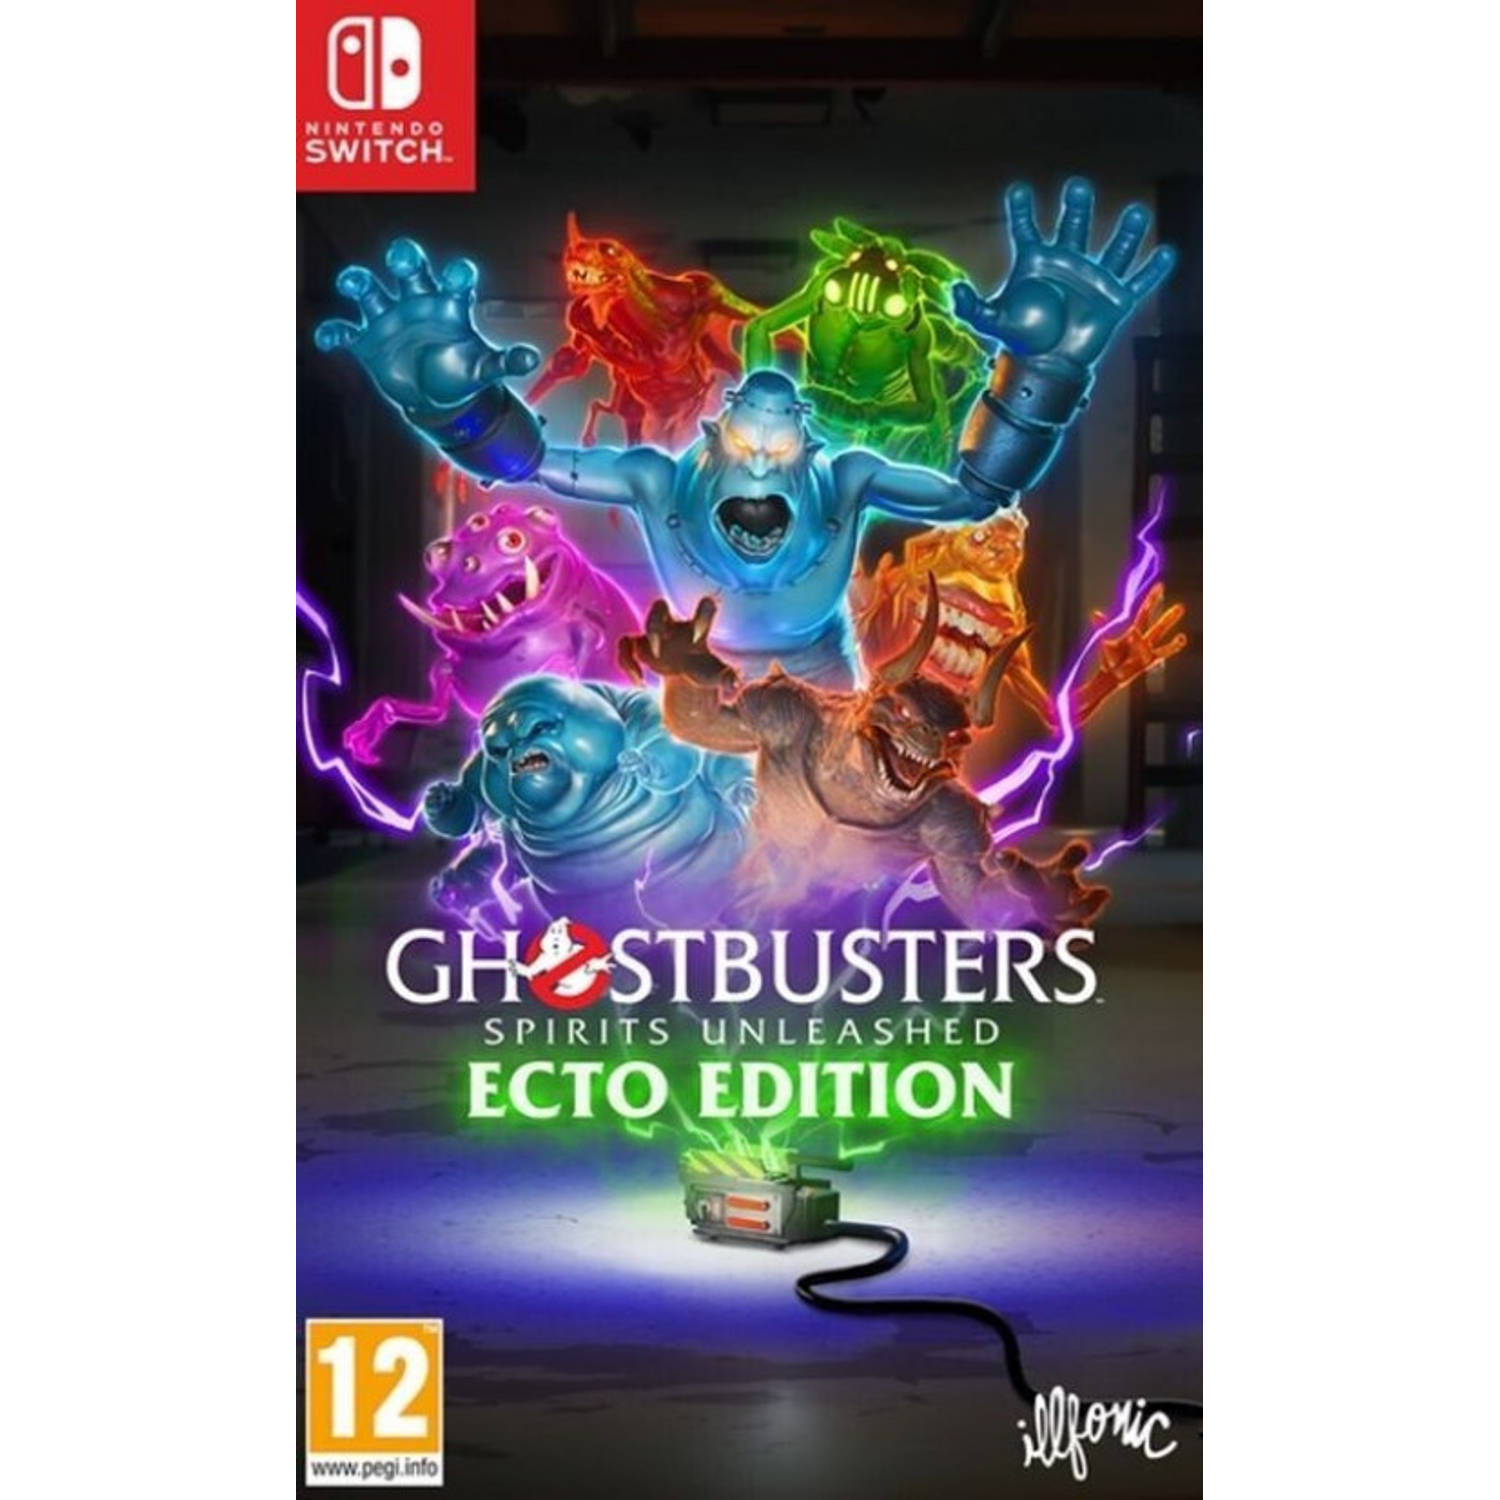 Ghostbusters: Spirits Unleashed Ecto Edition Nintendo Switch